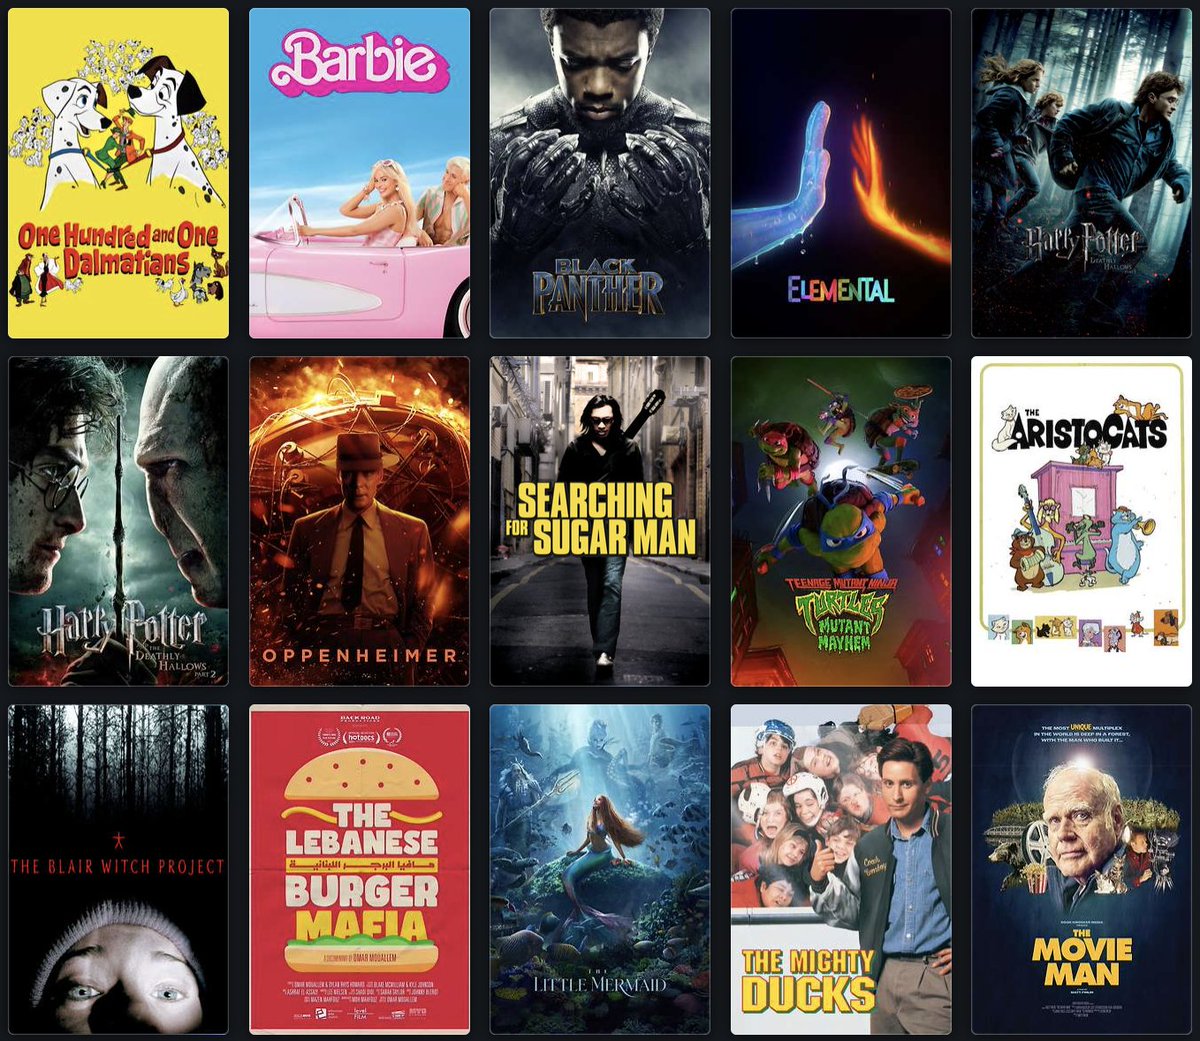 Discover the films we're screening at WIFF Under the Stars, our FREE community screening event! Check out the full list and add films to your watchlist on @letterboxd Explore the list: boxd.it/vrvzq